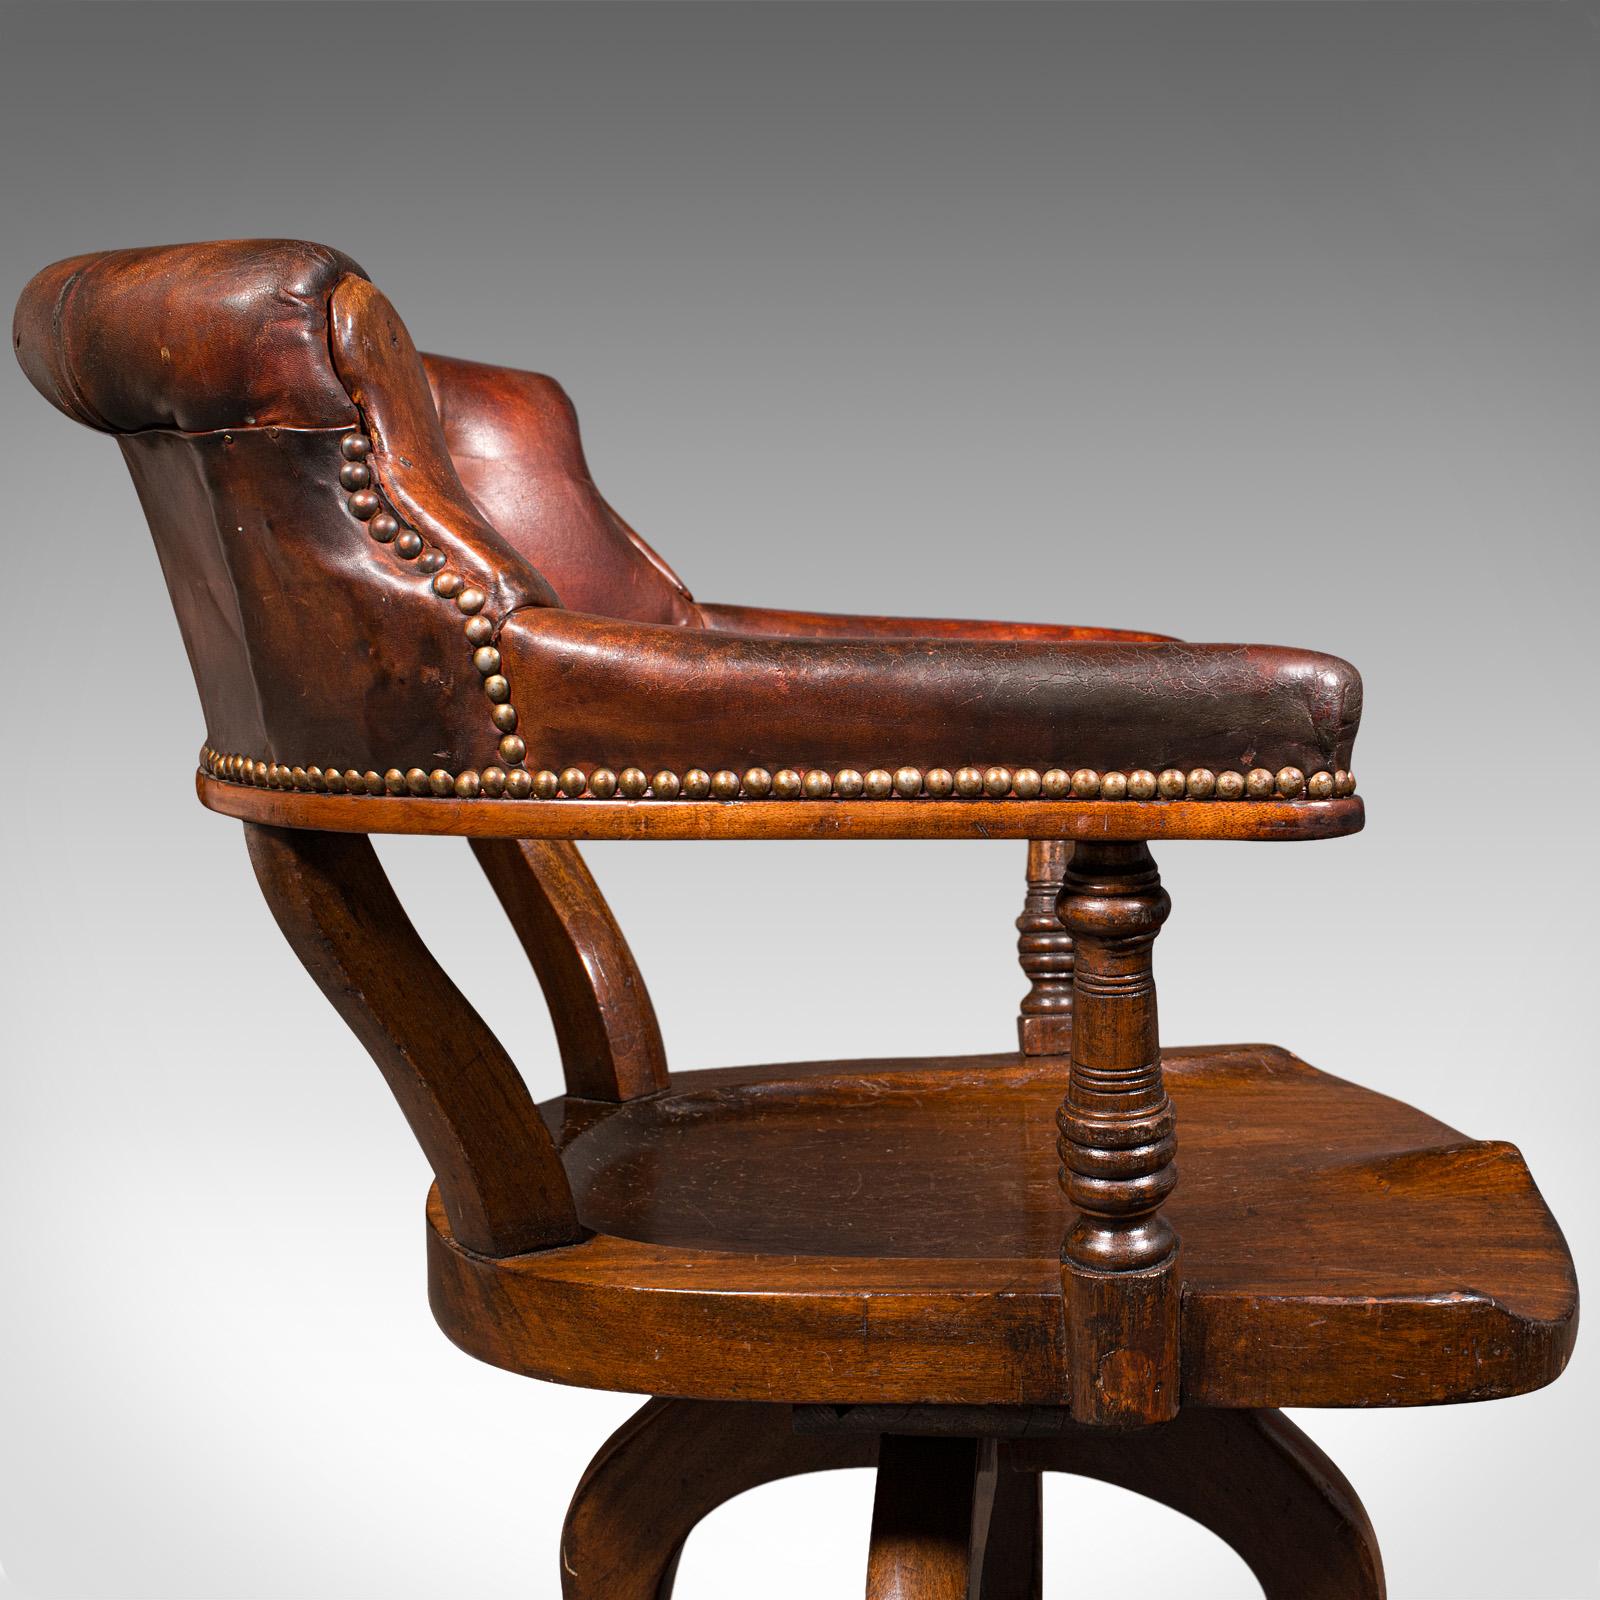 Antique Porter's Hall Chair, English, Leather, Rotary Desk Seat, Victorian, 1880 For Sale 7